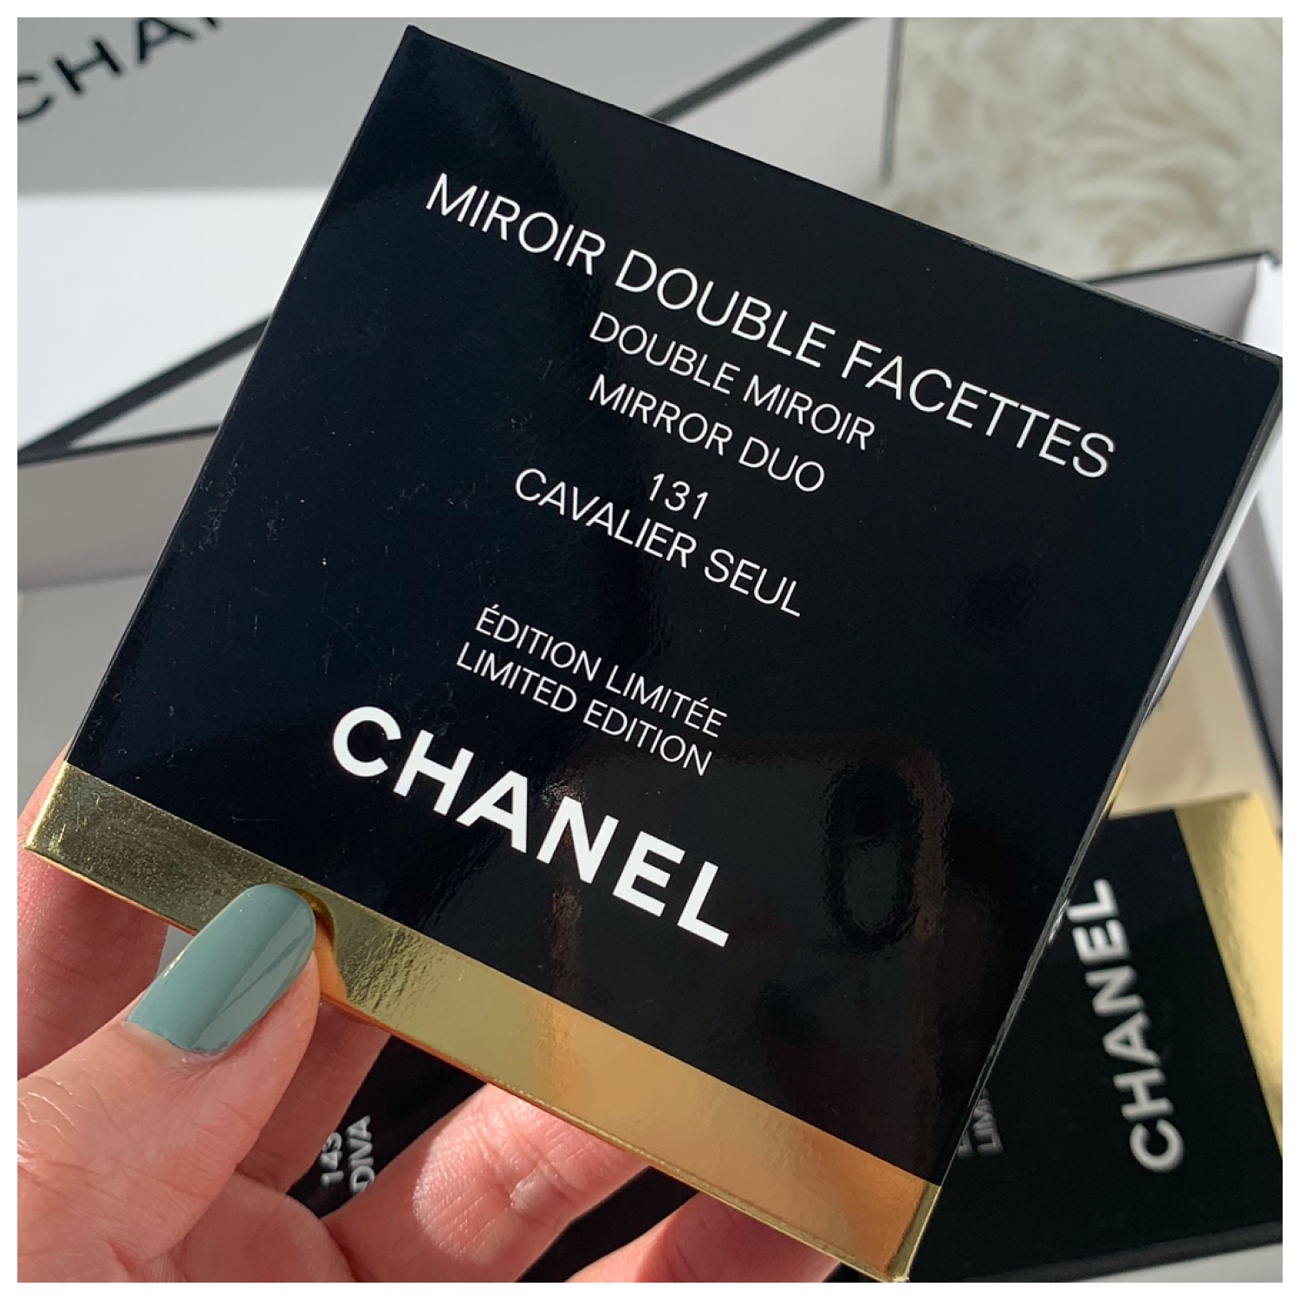 The Chanel CODES COULEUR pop-up opens in Hong Kong